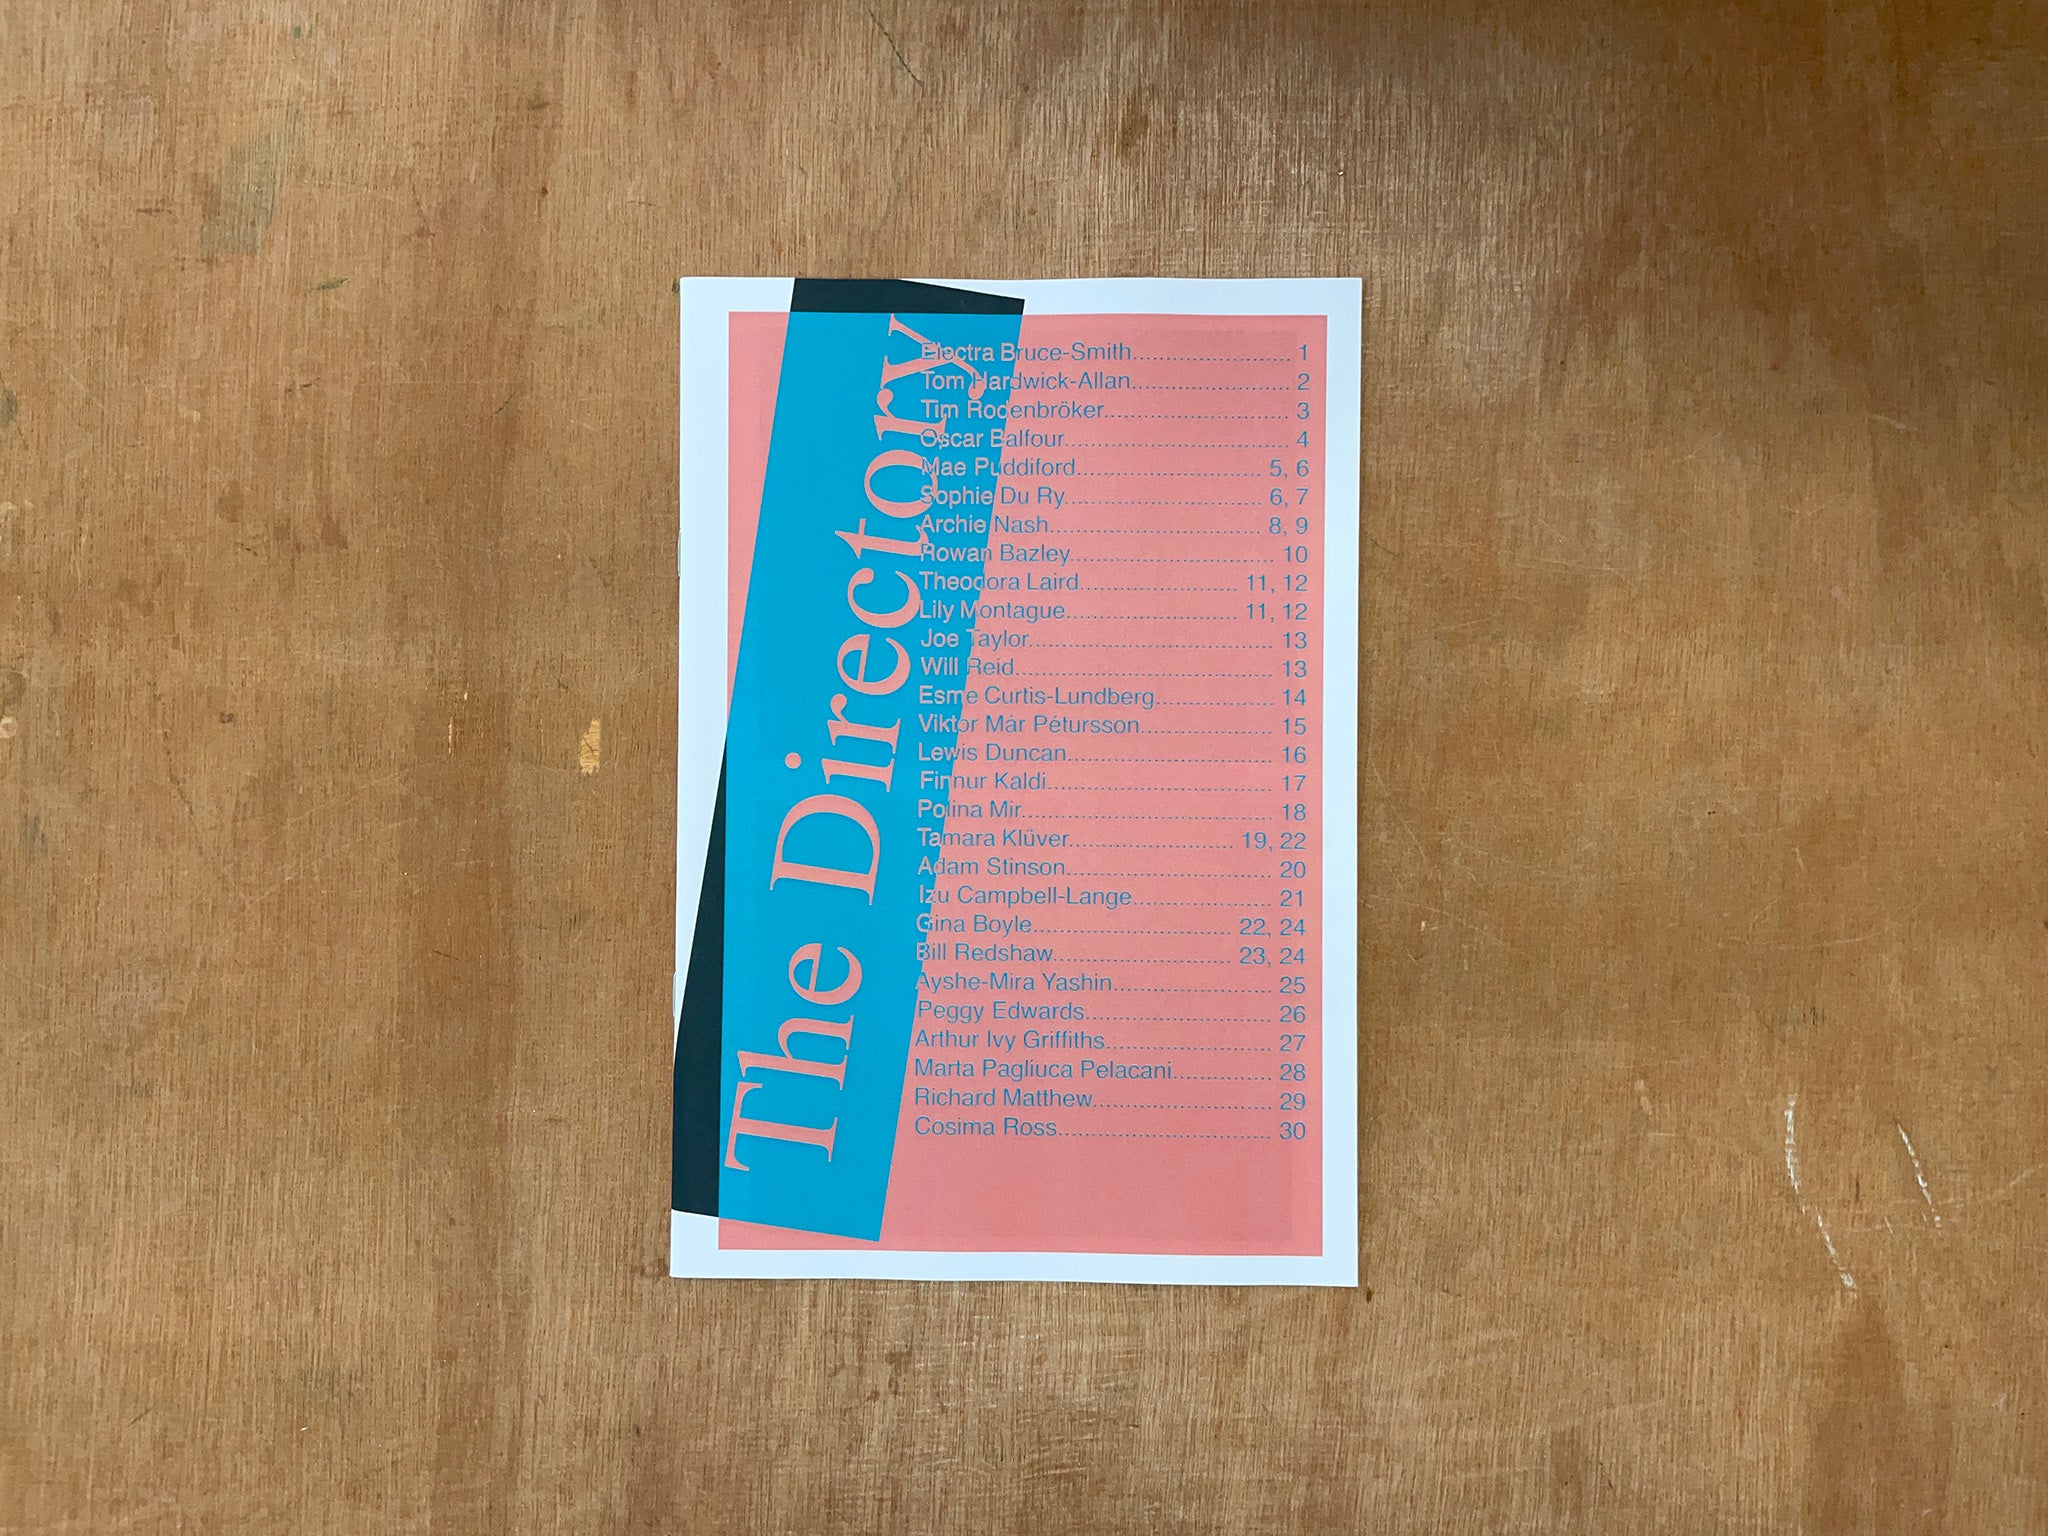 THE DIRECTORY by Cosima Ross and Lily Montague